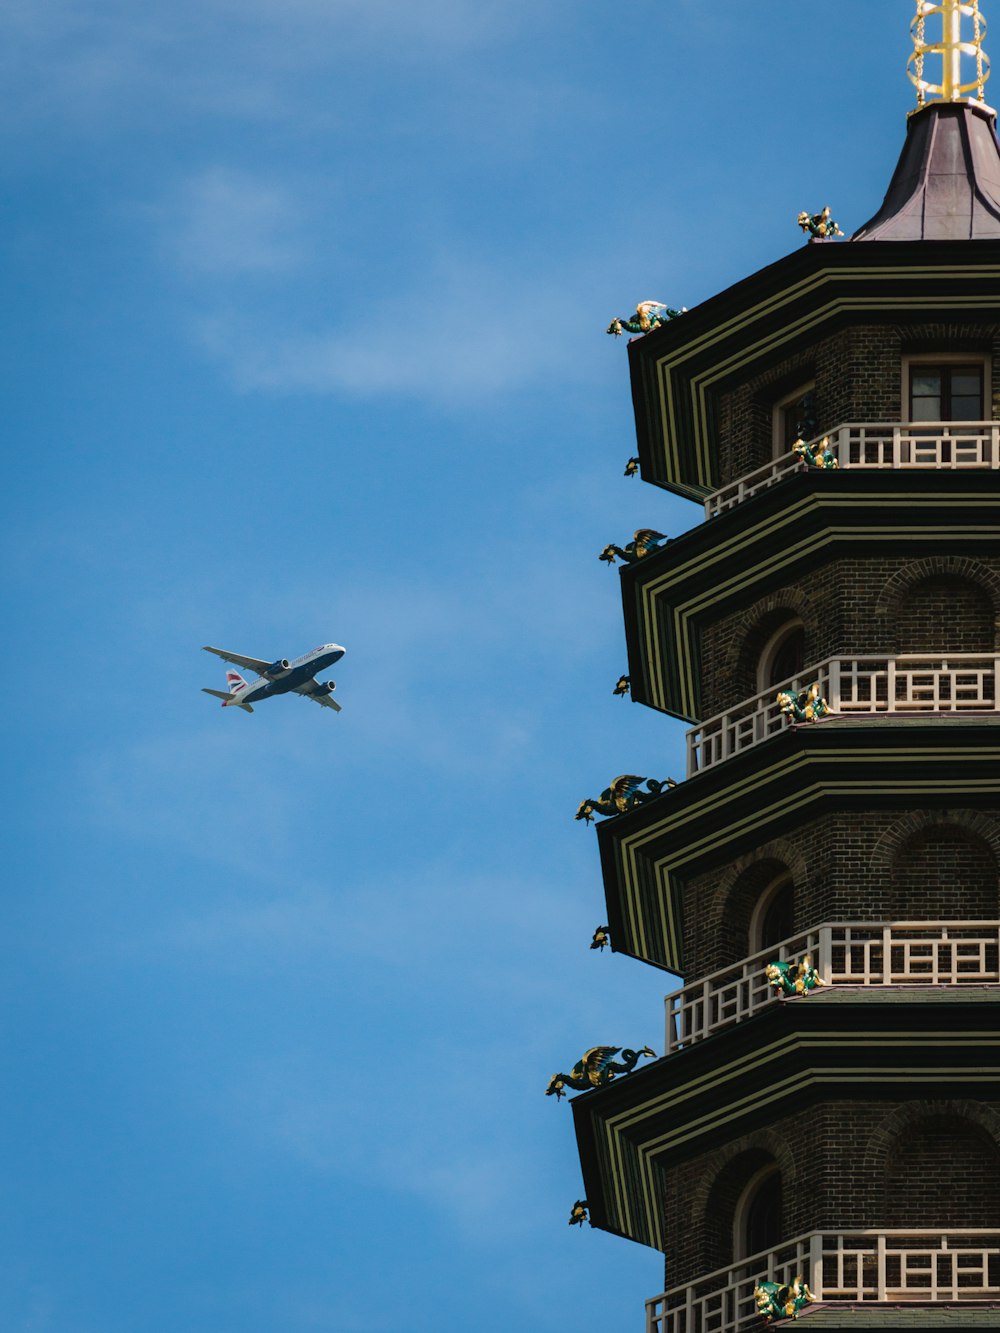 an airplane is flying over a tall tower